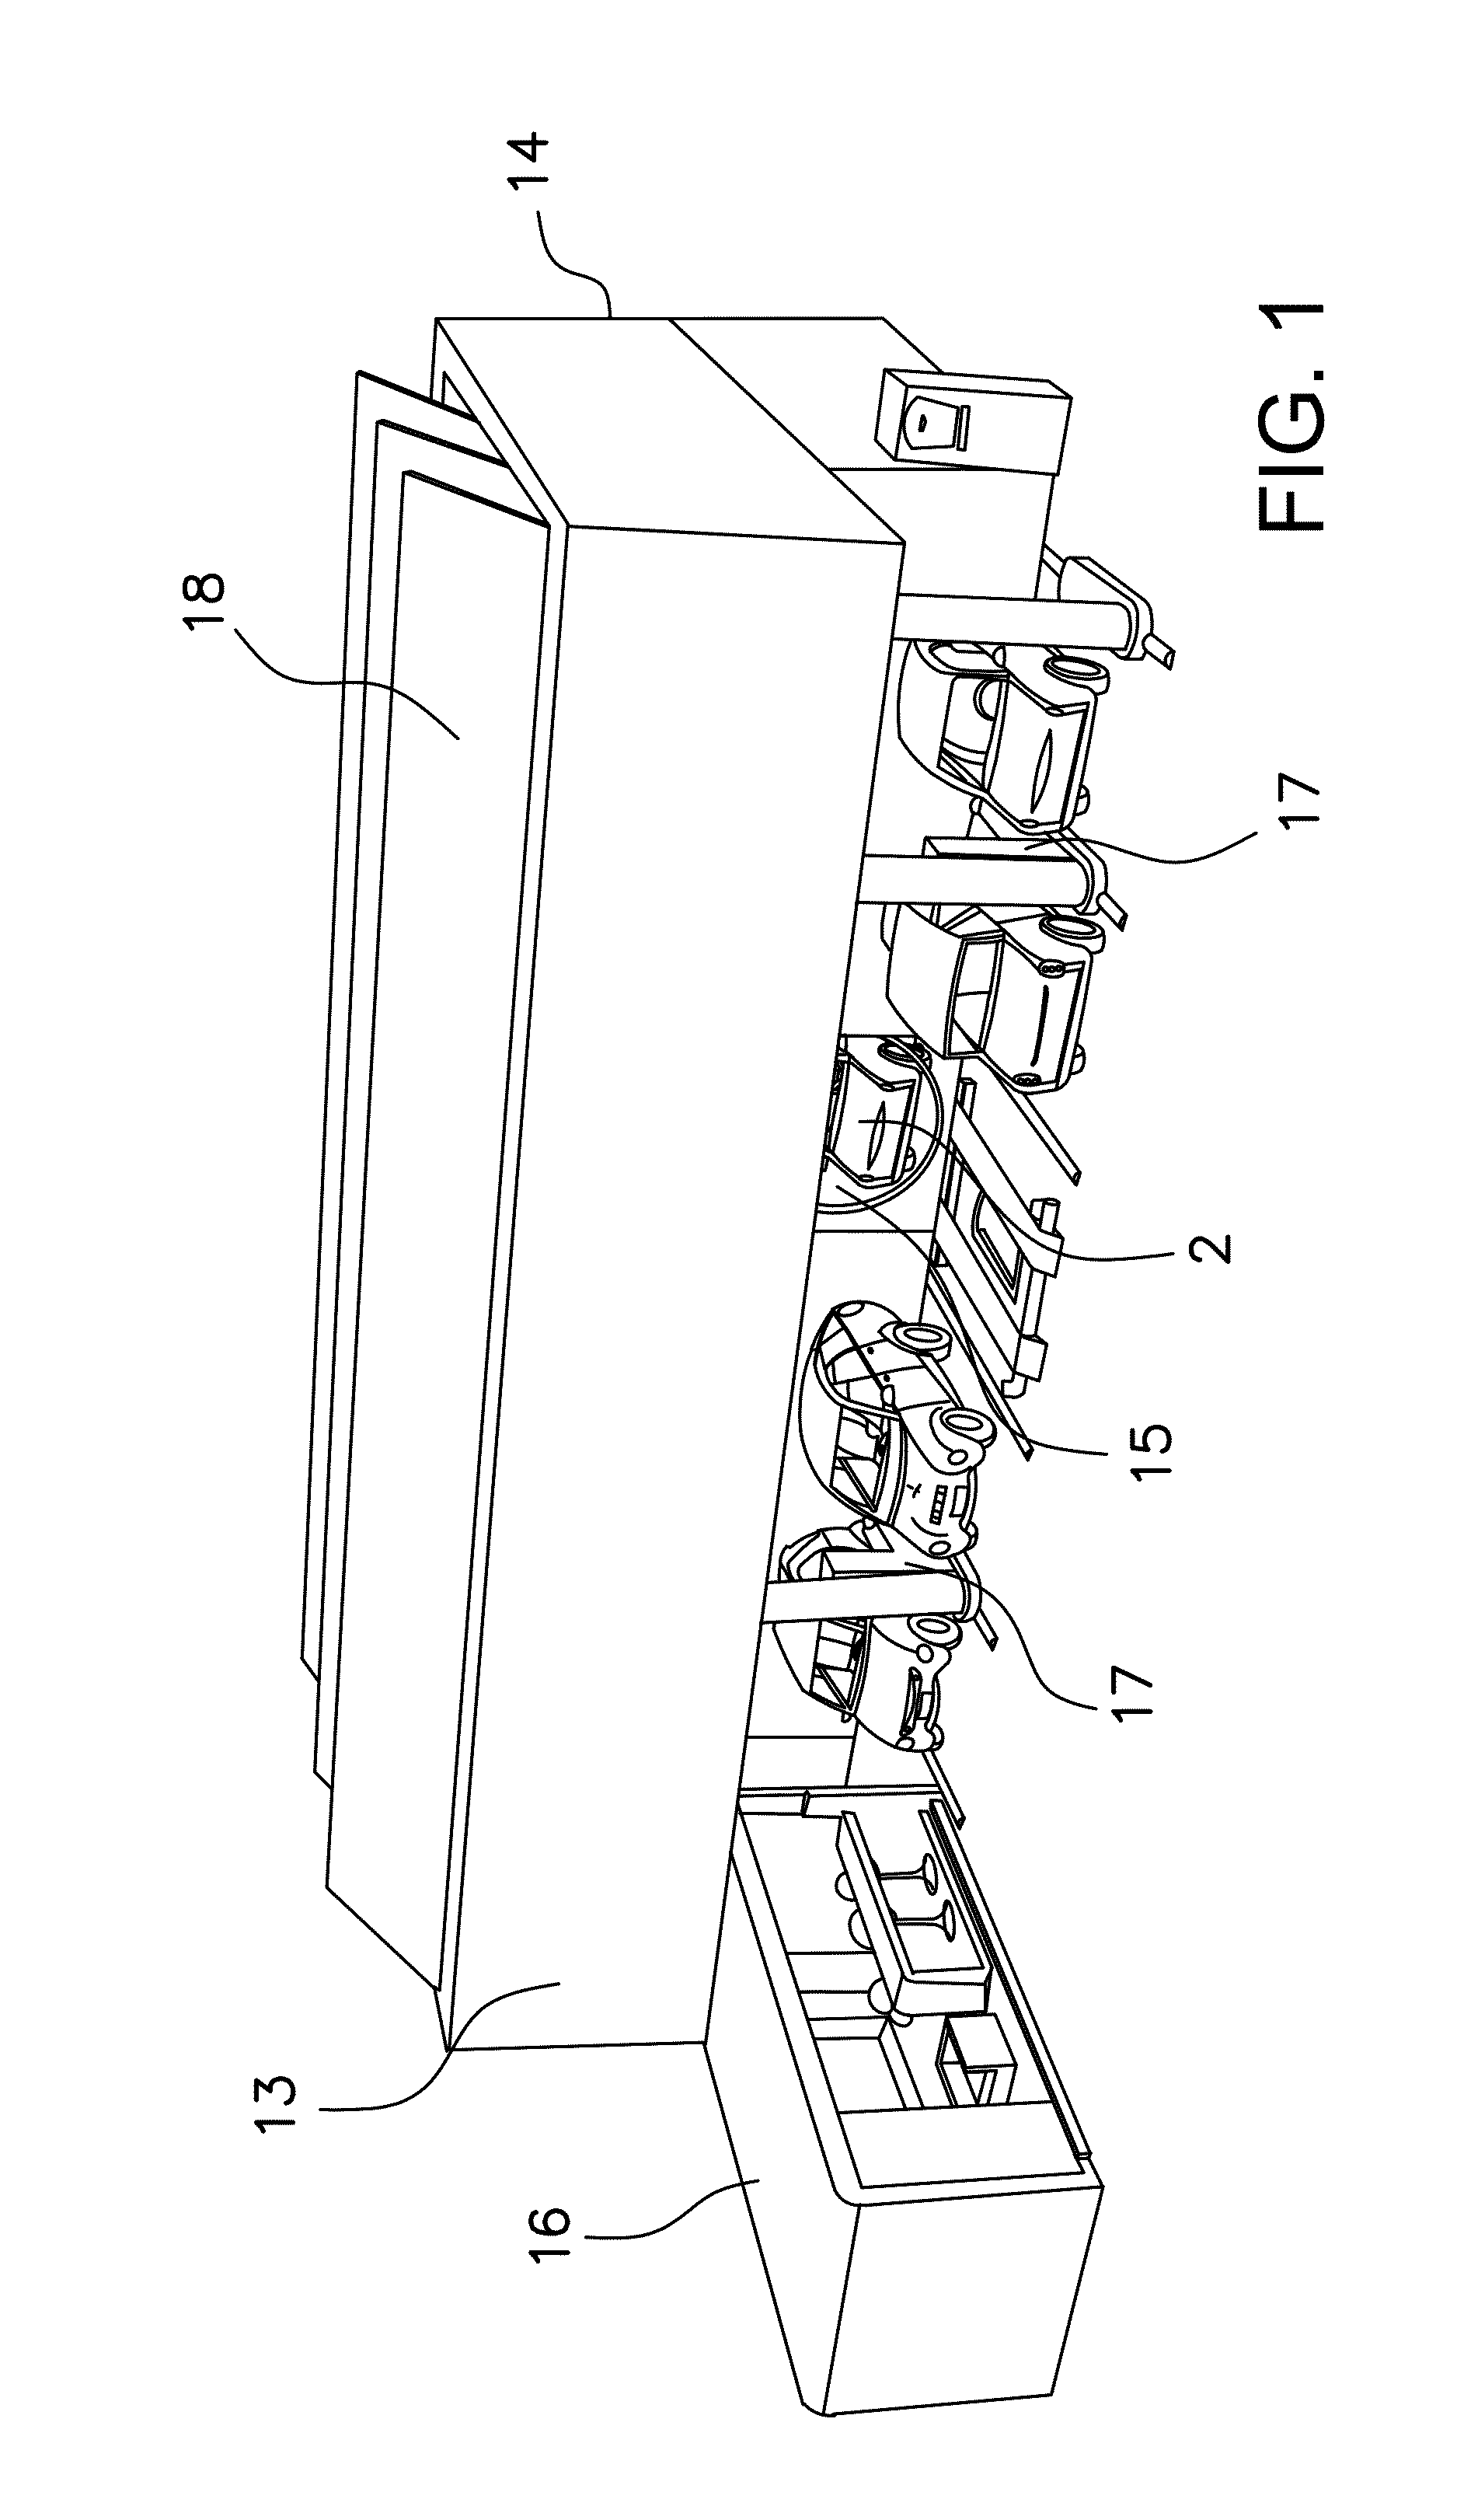 Facility for parking and recharging electrical vehicles